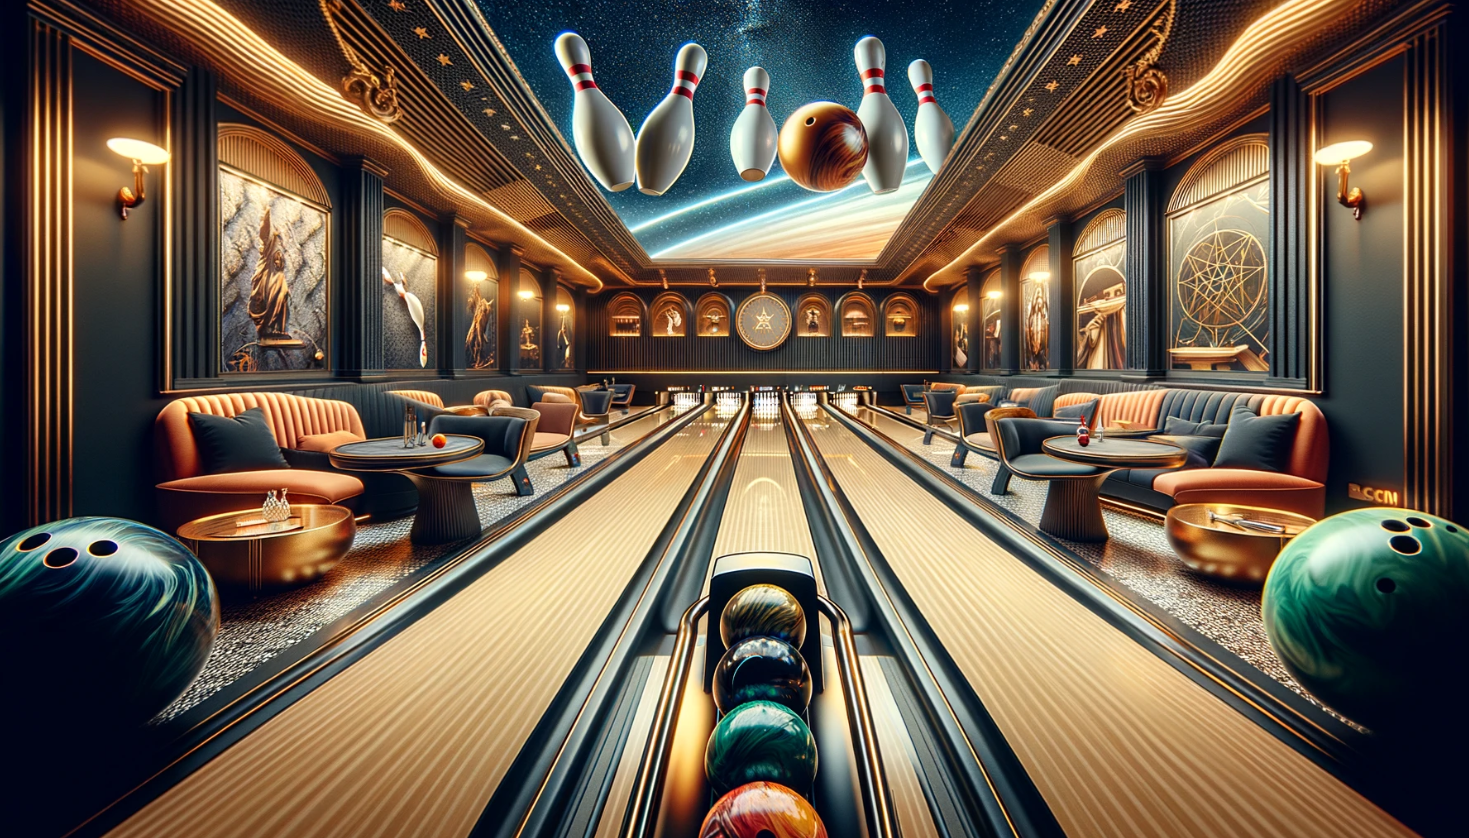 Strike Gold: Exploring the World’s Top Bowling Hotspots